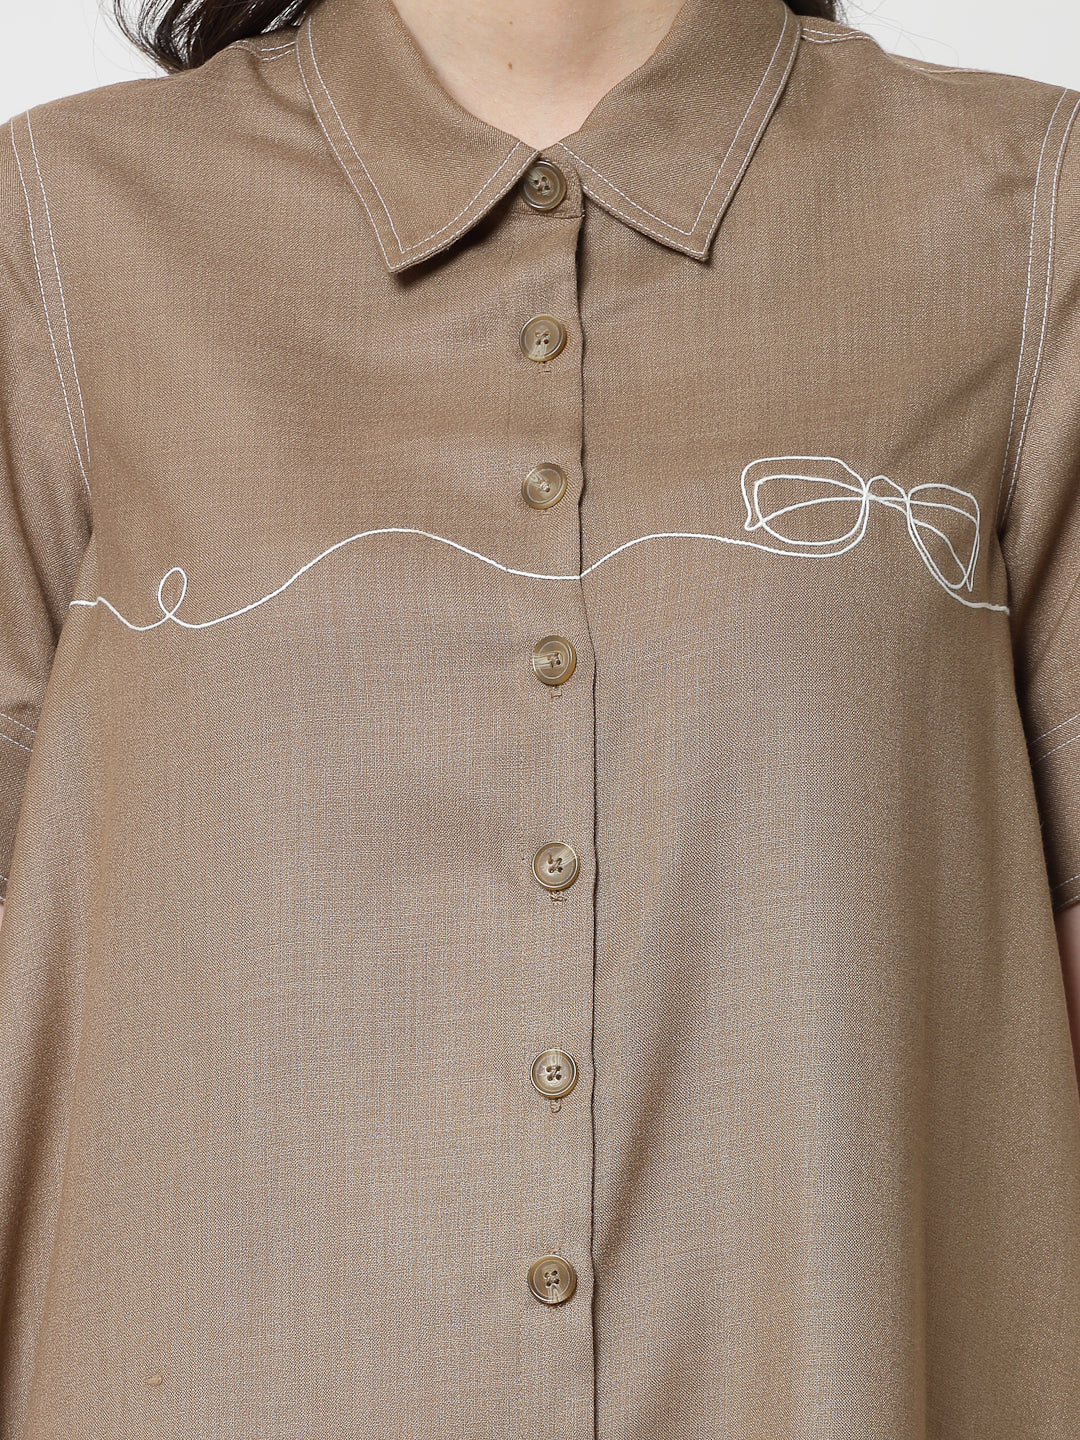 Dark Beige Dress With Embroidered Spectacles